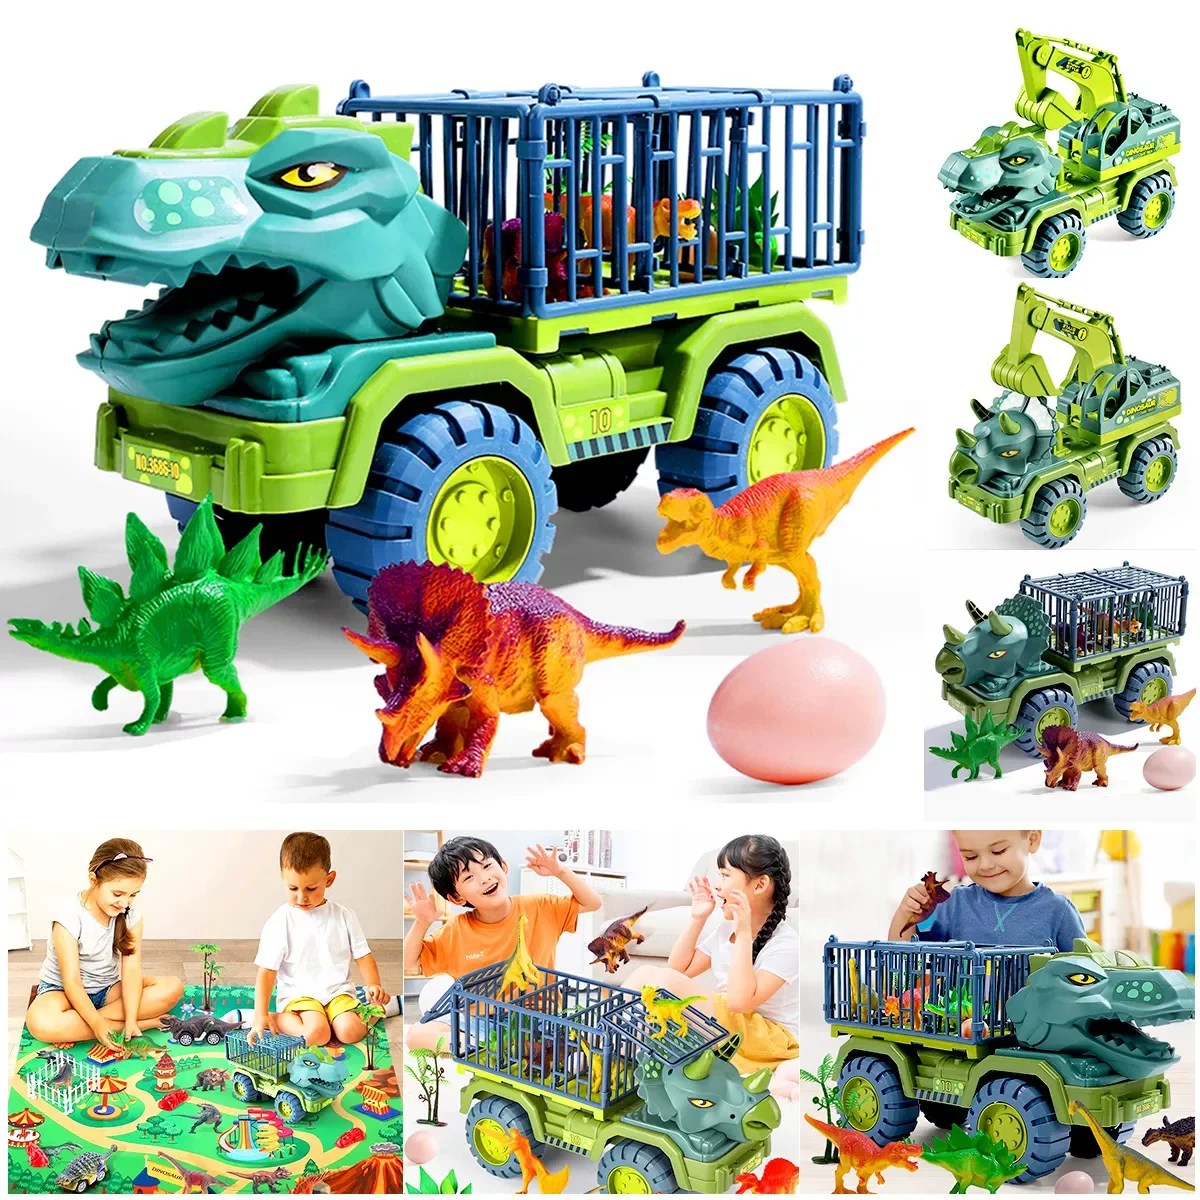 

Dinosaurs Transport Car Large Engineering Truck with Dinosaur Egg Gifts Pull Back Vehicle Toy for Children Birthday Party Favors